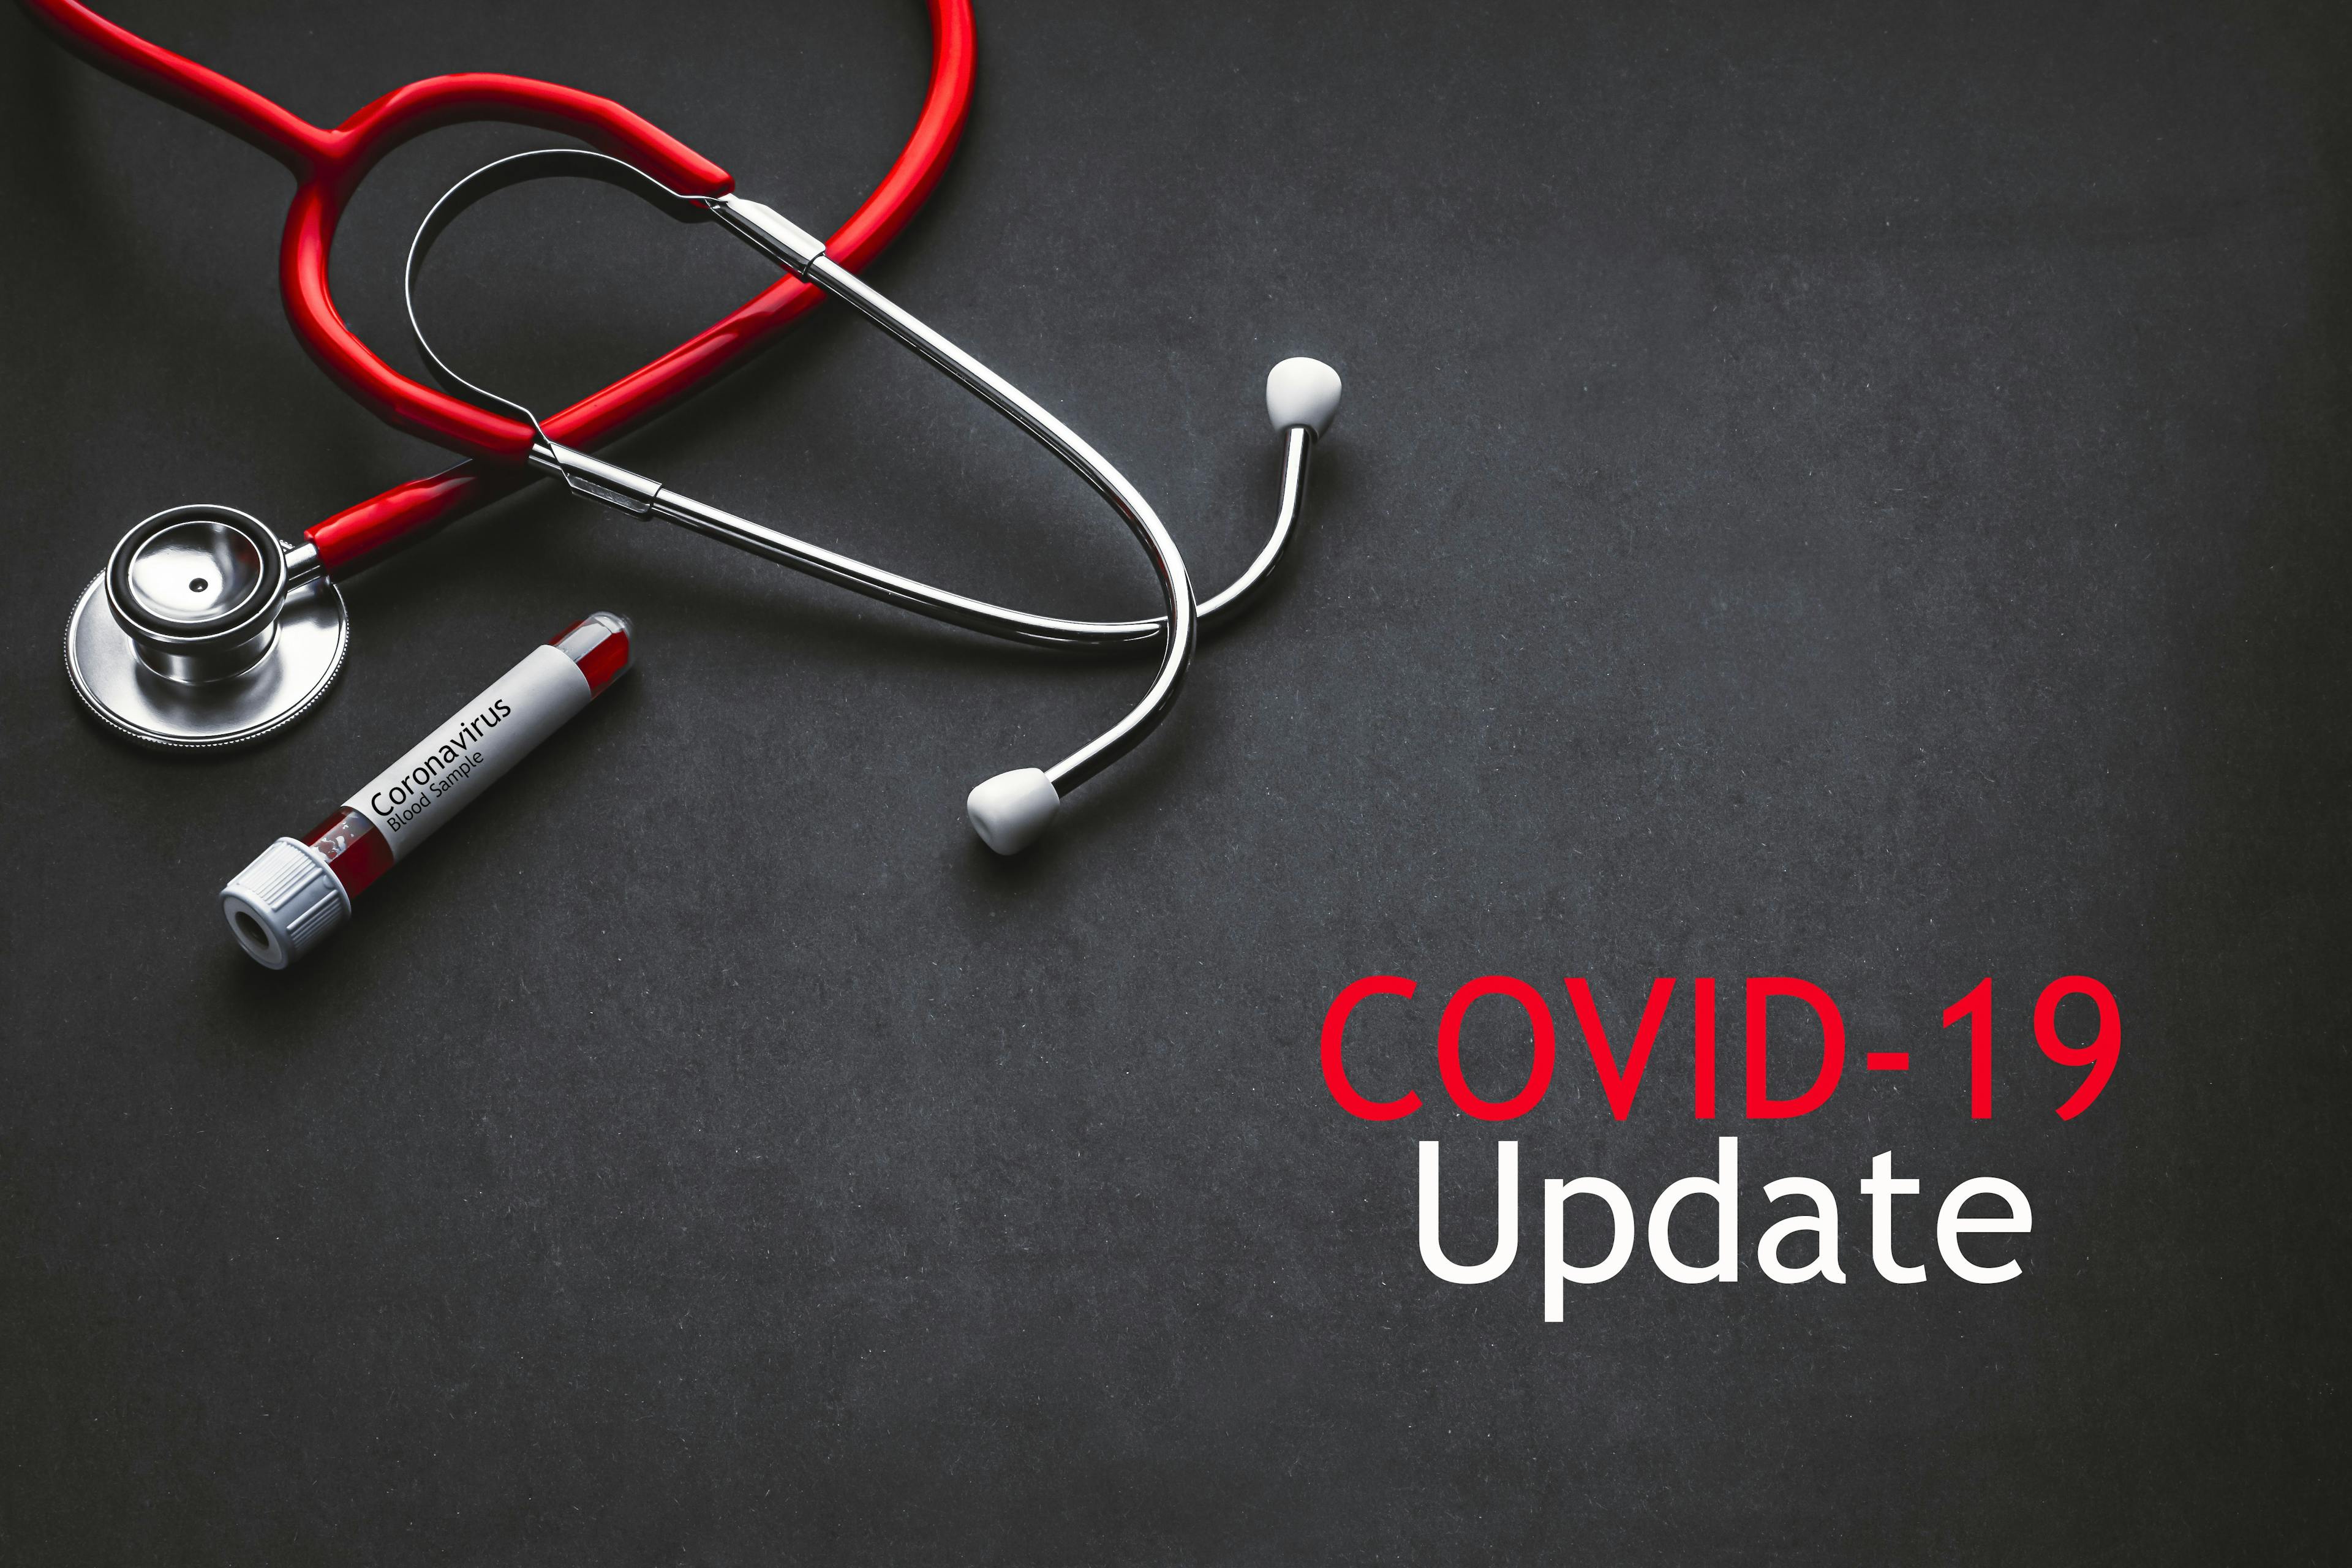 COVID-19 Update: US and Global Cases, Deaths, and Recoveries as of August 10, 2020